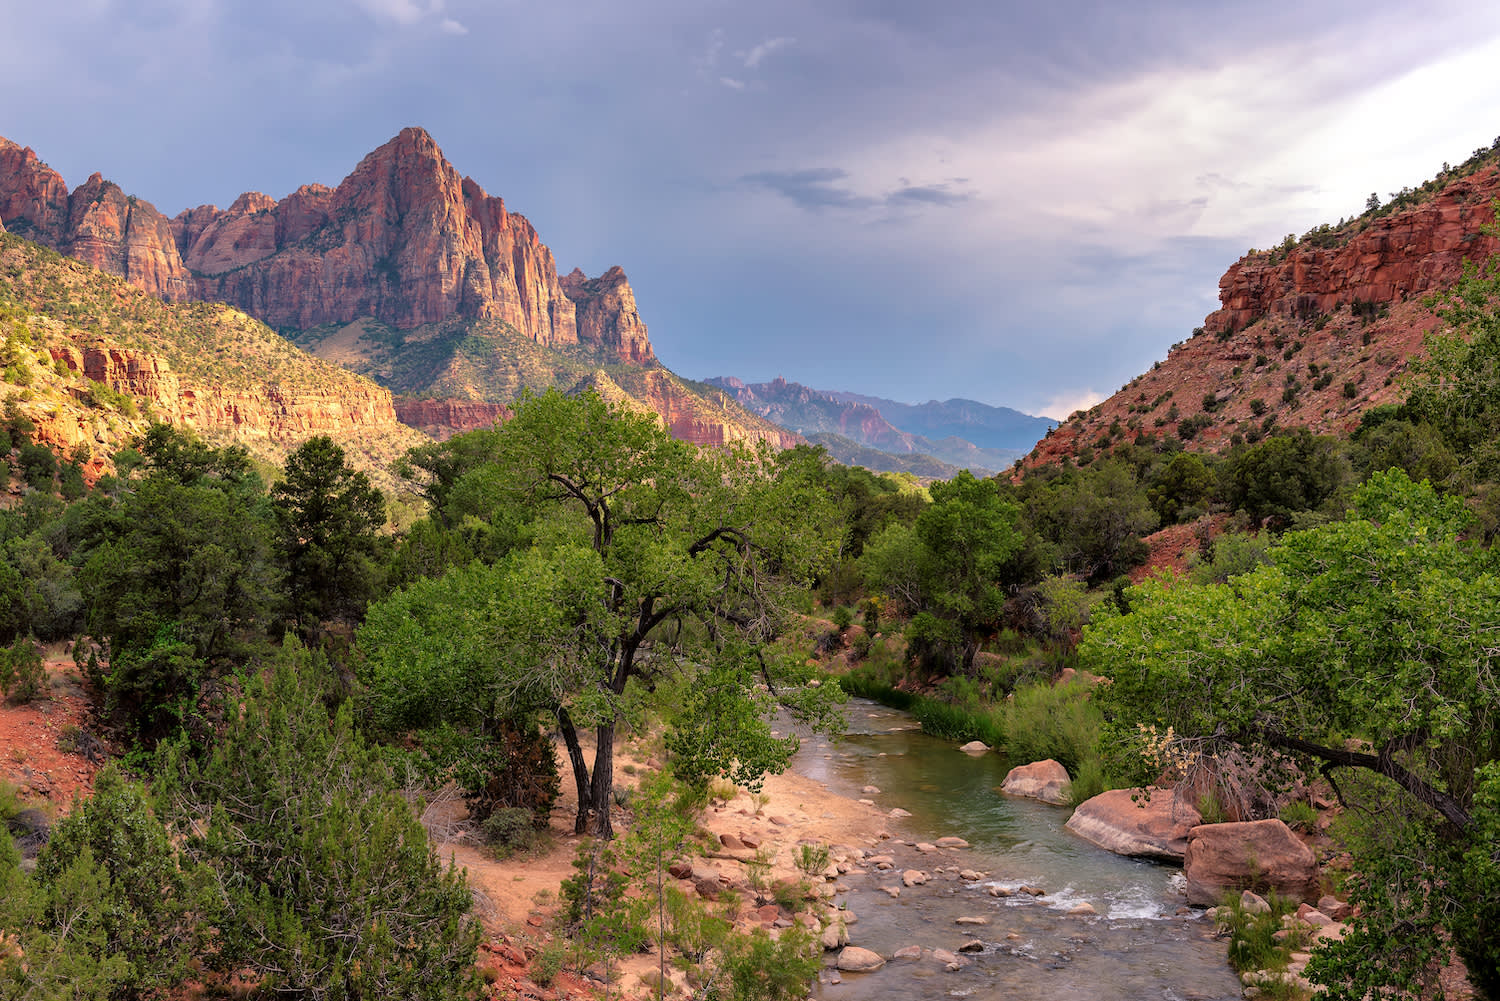 Evening on the Watchman trail by the Virgin River in Zion National Park